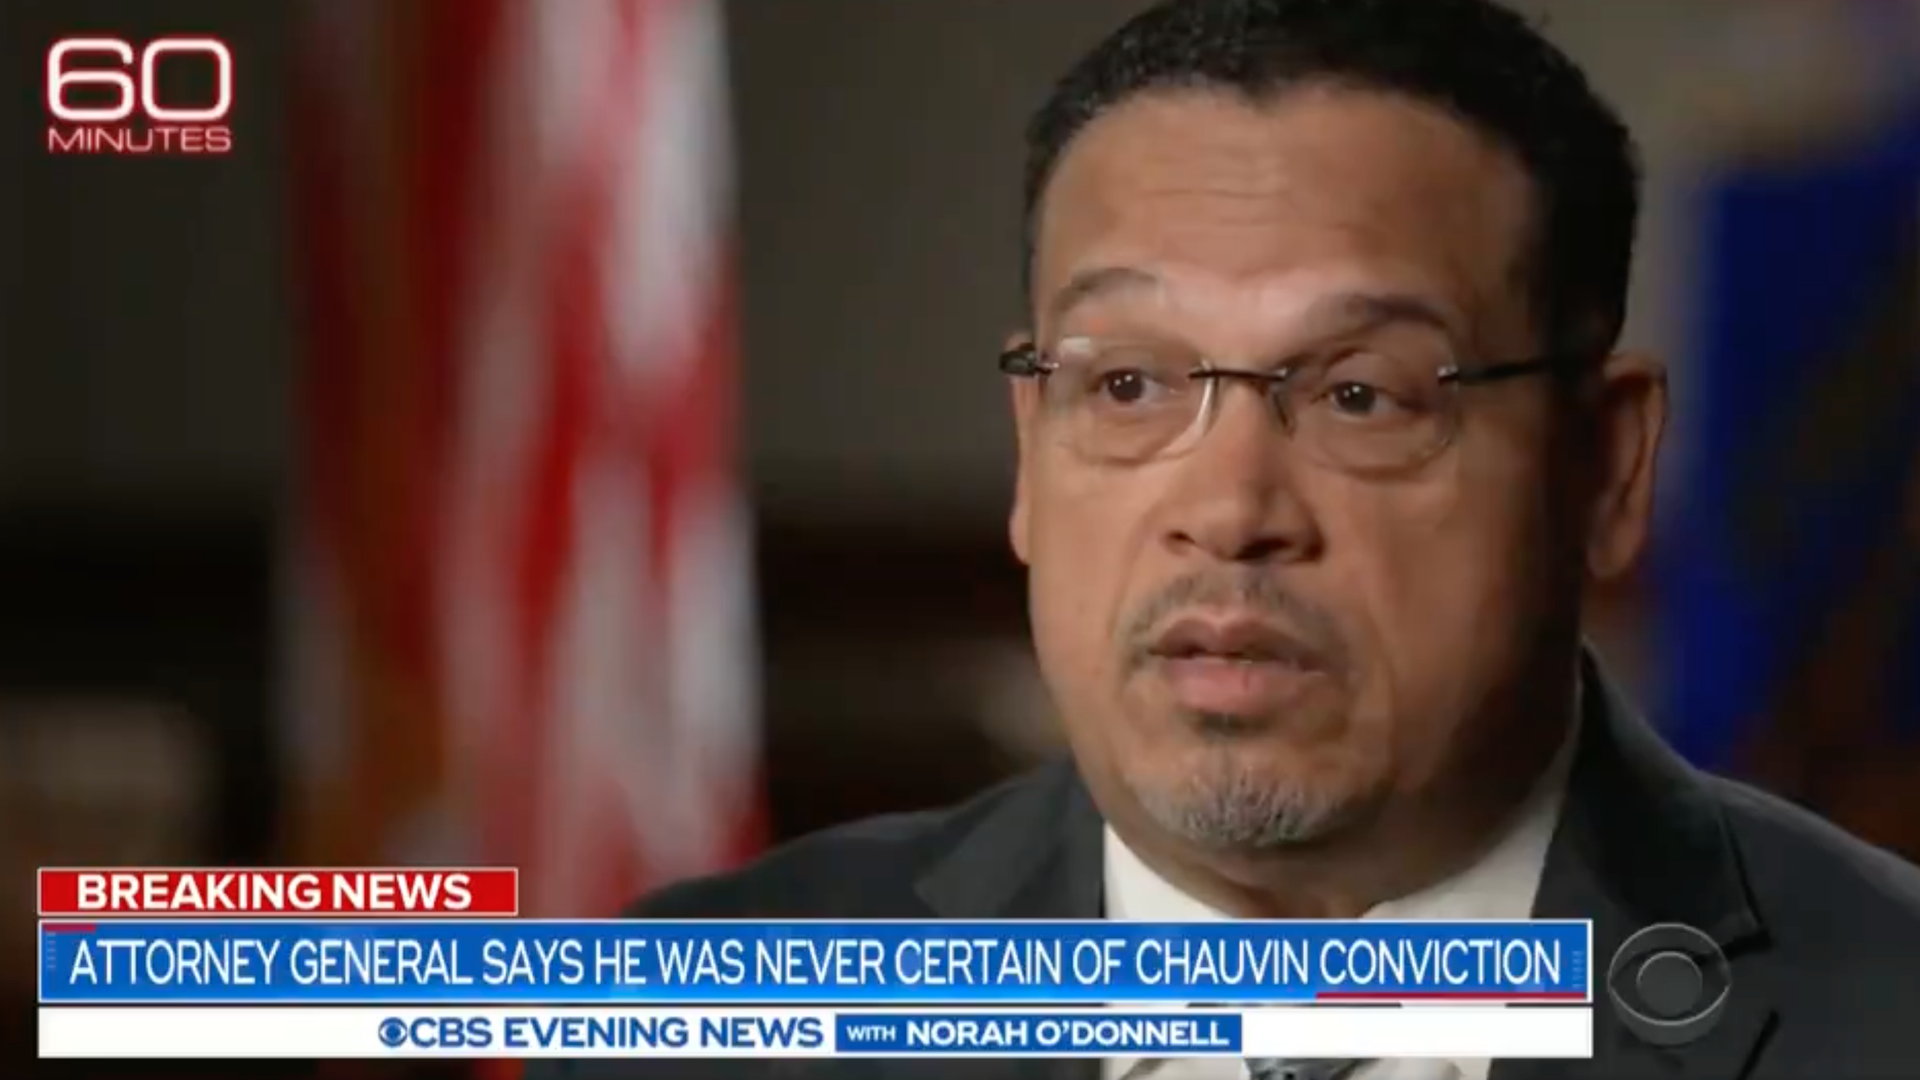 A screenshot of Minnesota Attorney General Keith Ellison being interviewed on "60 Minutes."